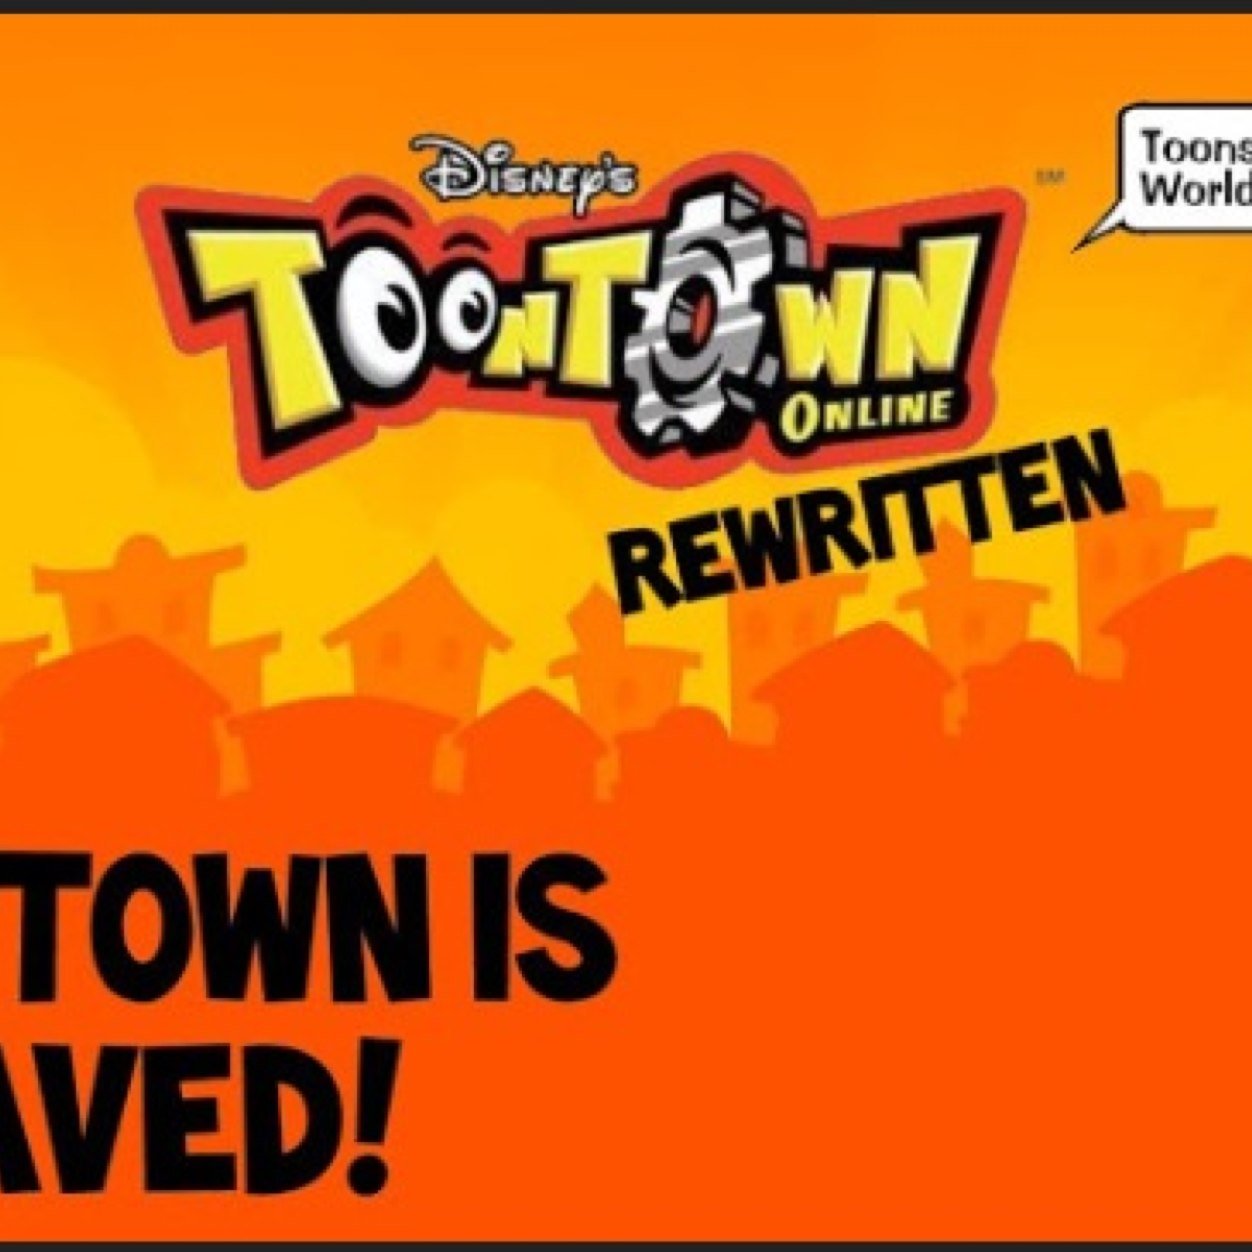 Big toontown player. Follow and ill follow back. DM if you want to play with me